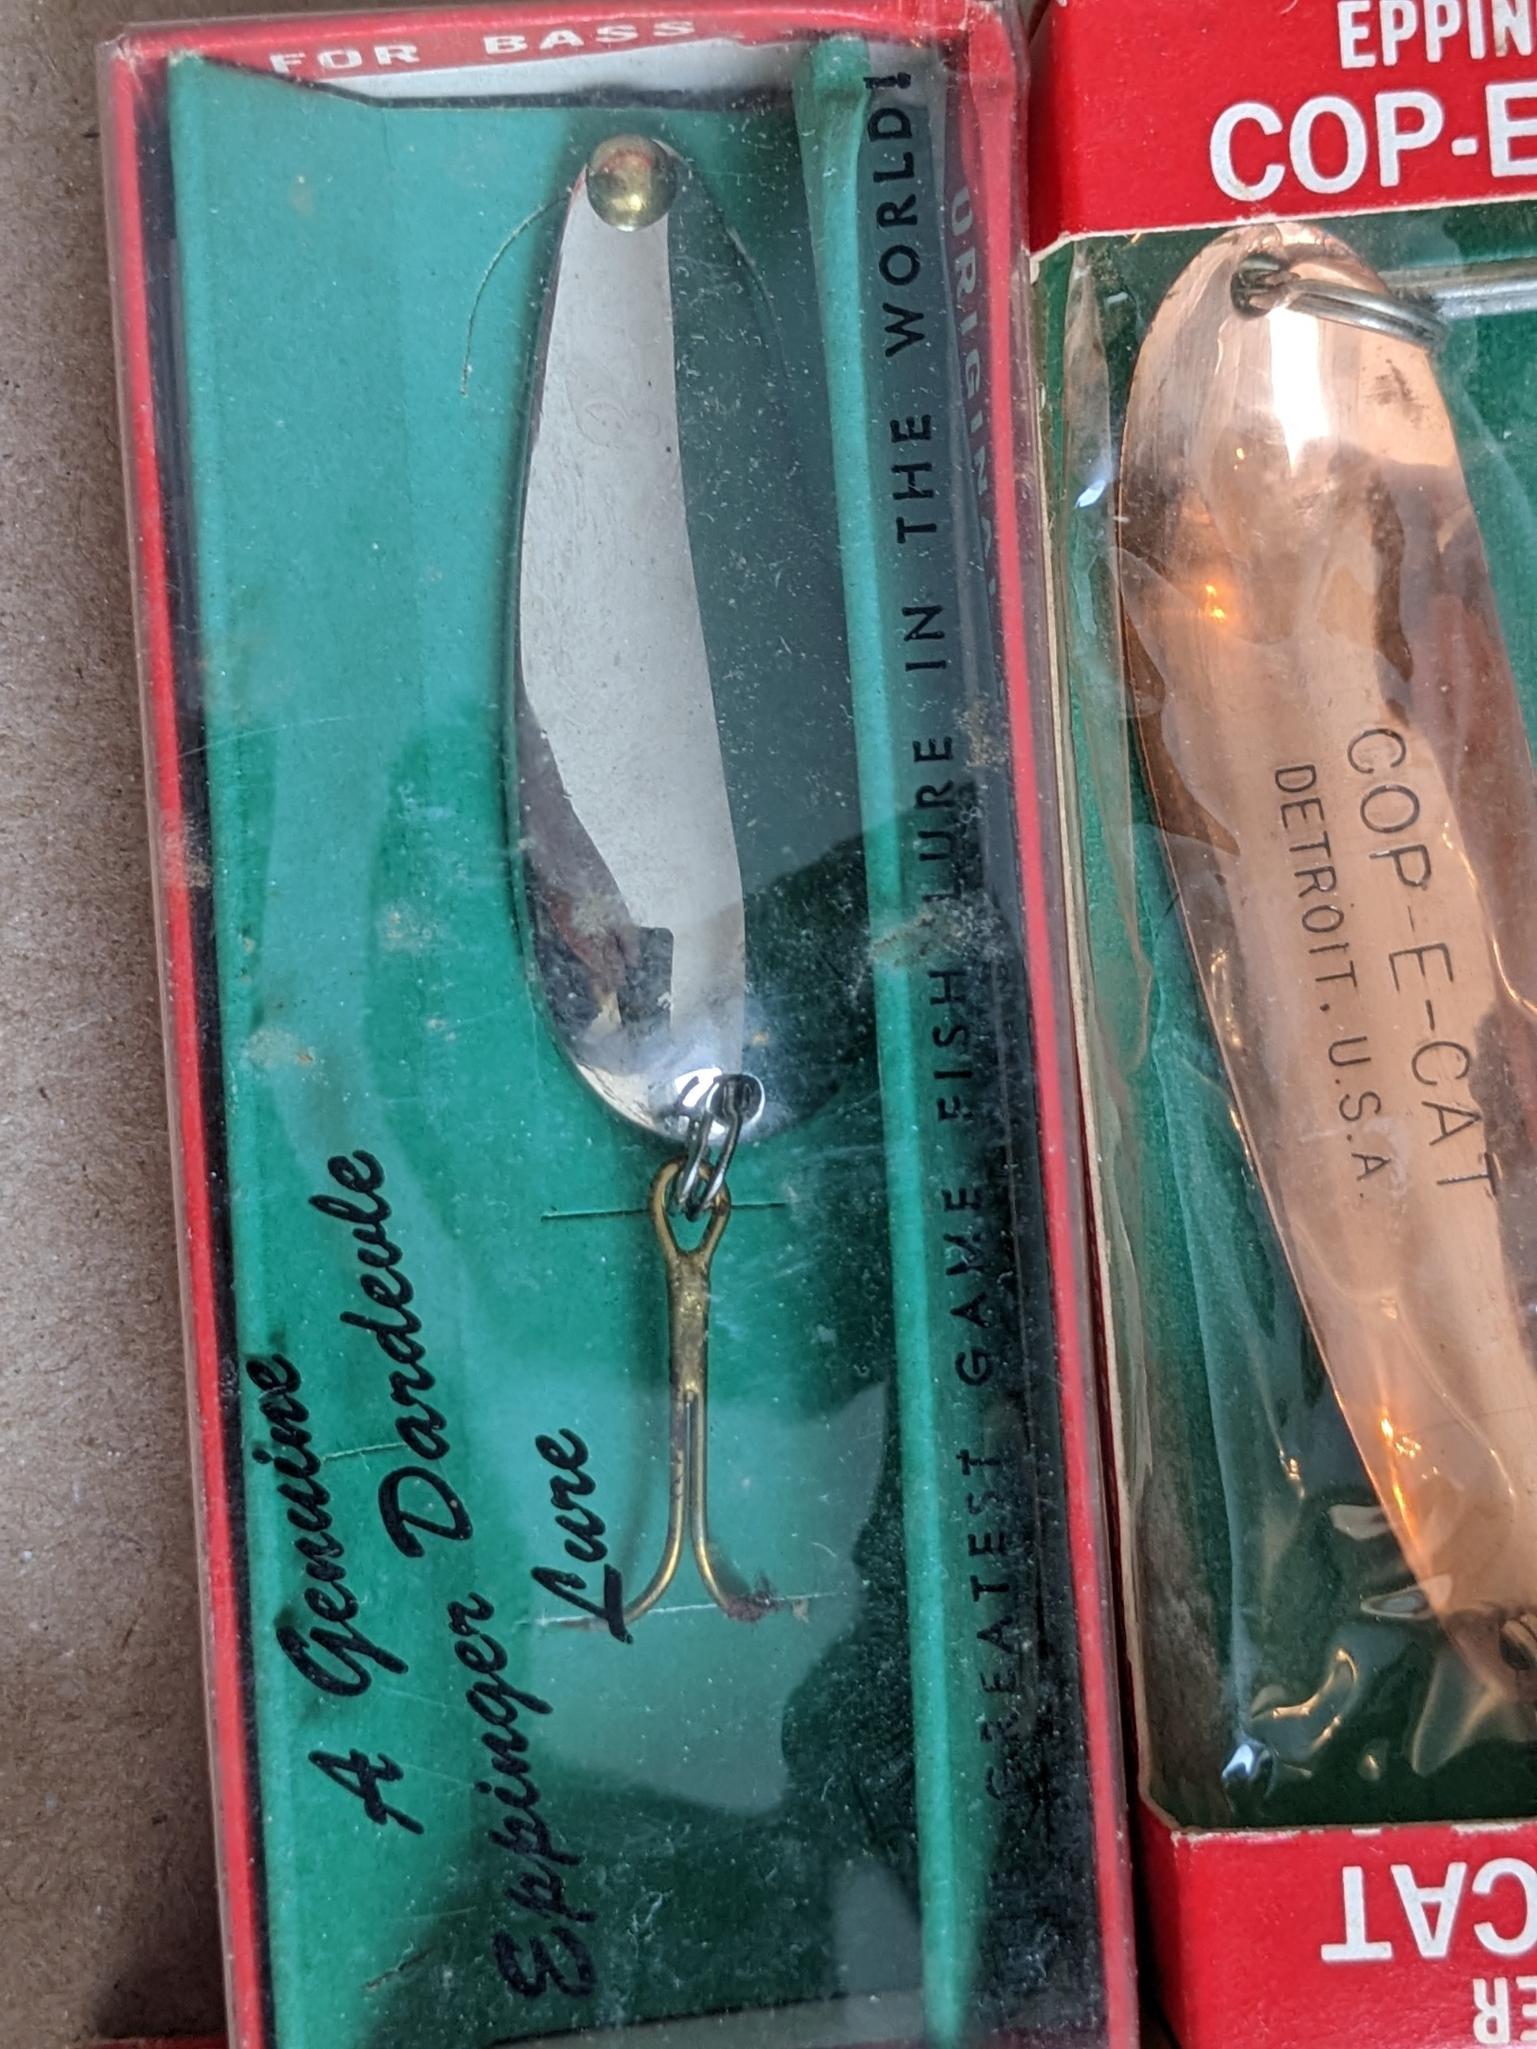 Kush Spoon, Osprey Eppinger COP-E-CAT, and 2